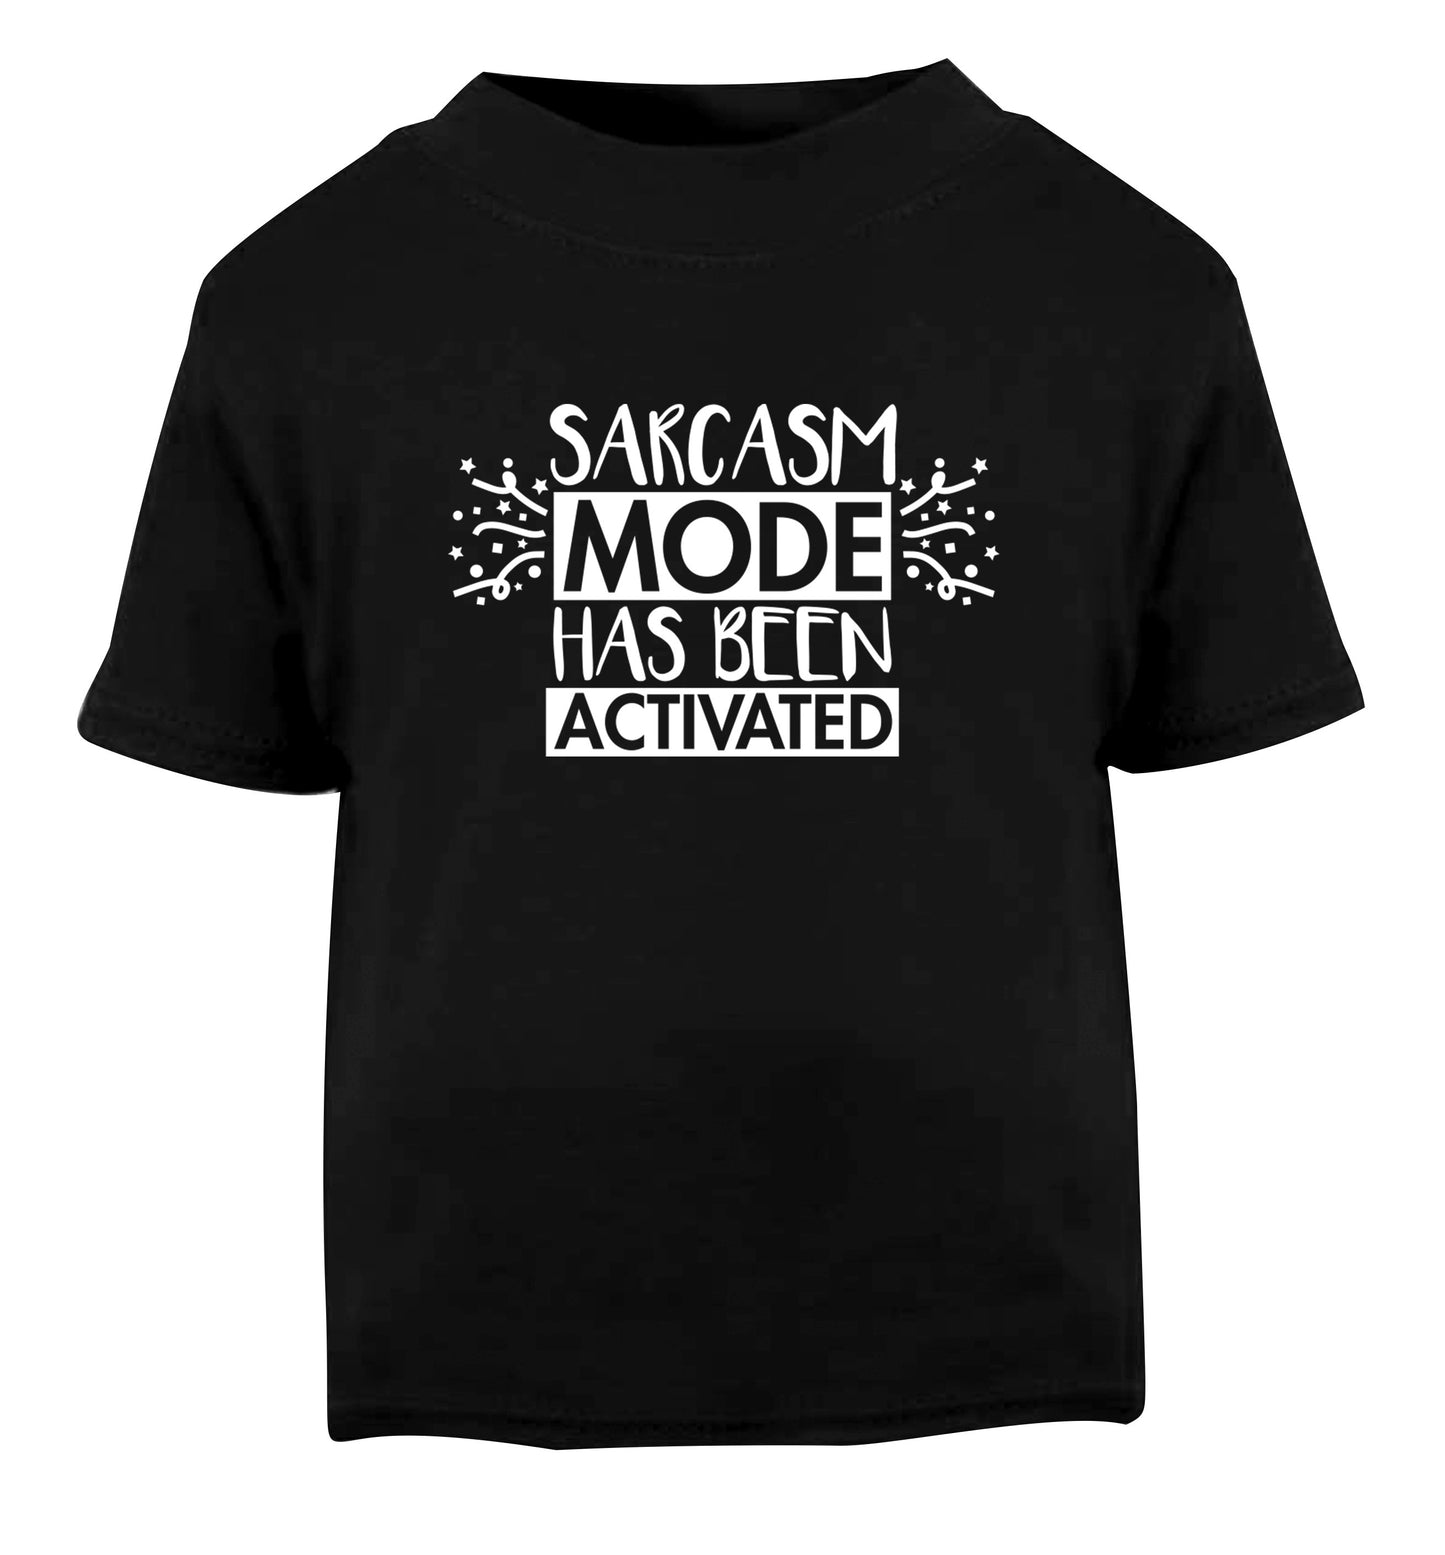 Sarcarsm mode has been activated Black Baby Toddler Tshirt 2 years